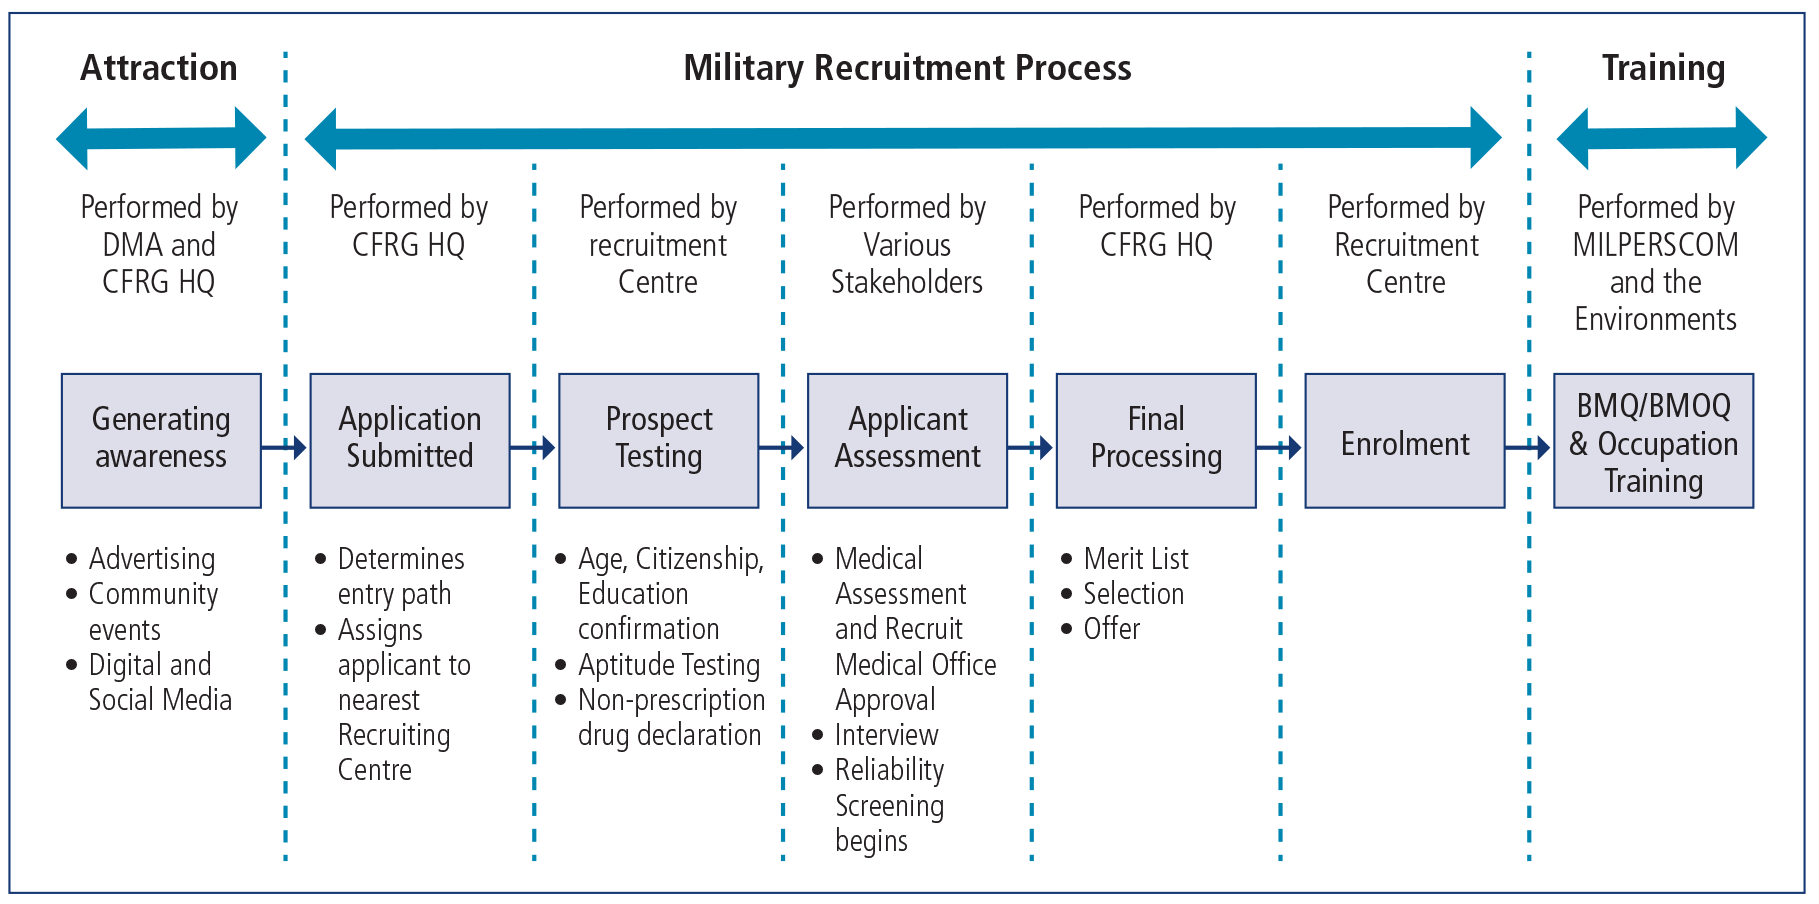 Figure 5 is a flowchart summarizing the military recruitment process, extracted from the 2019 Advisory of the Military Recruitment Process November Report